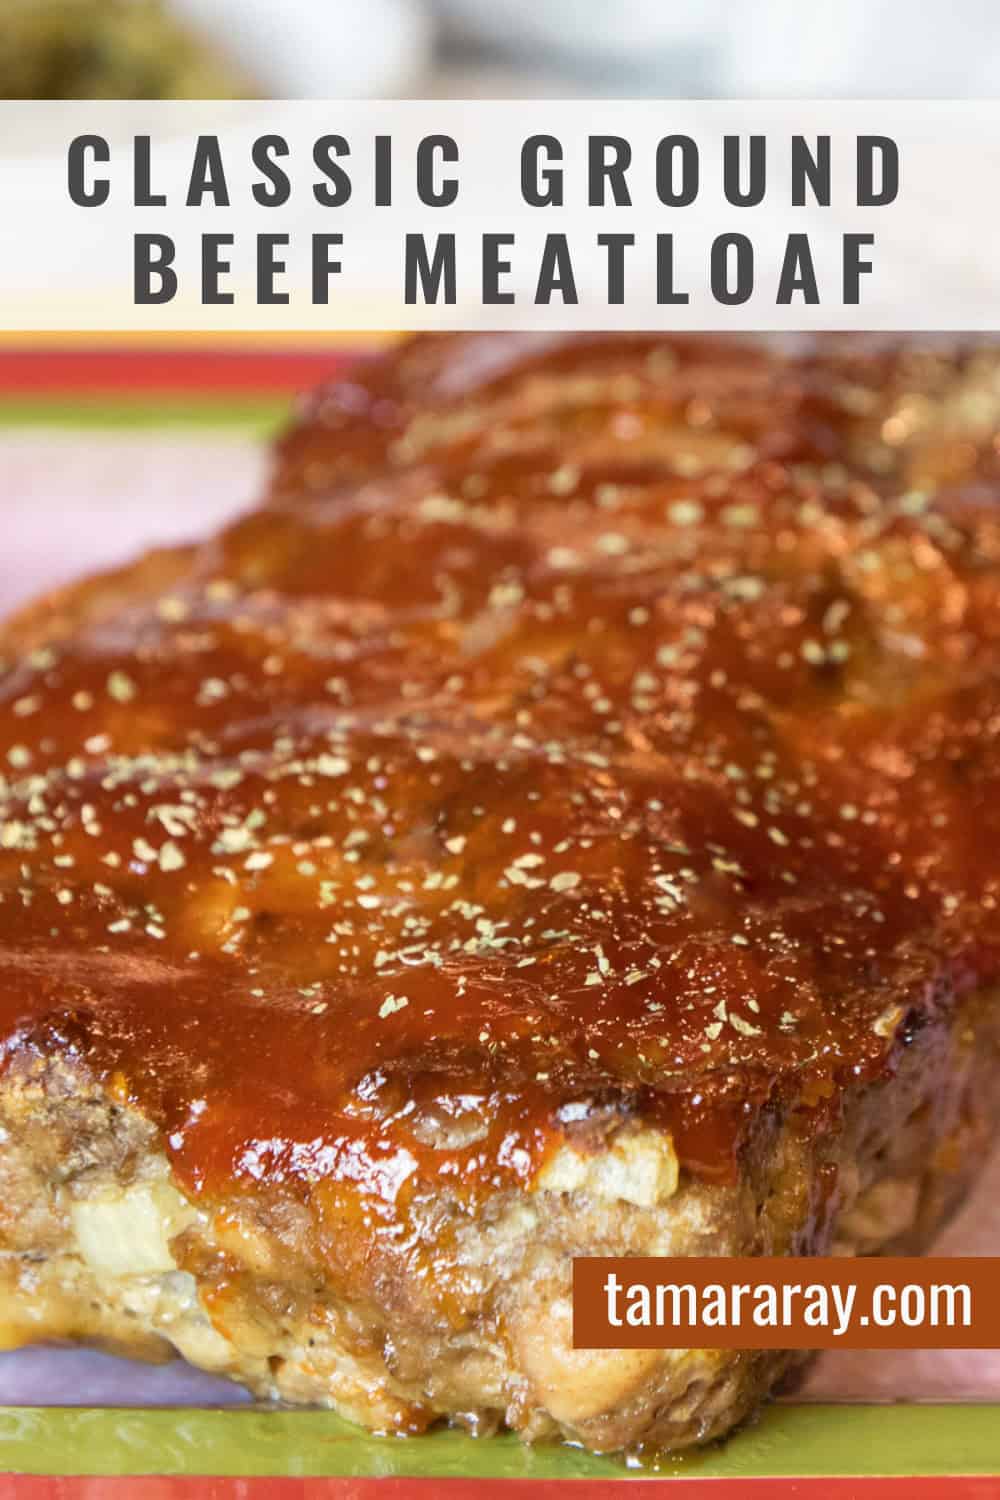 Classic ground beef meatloaf.